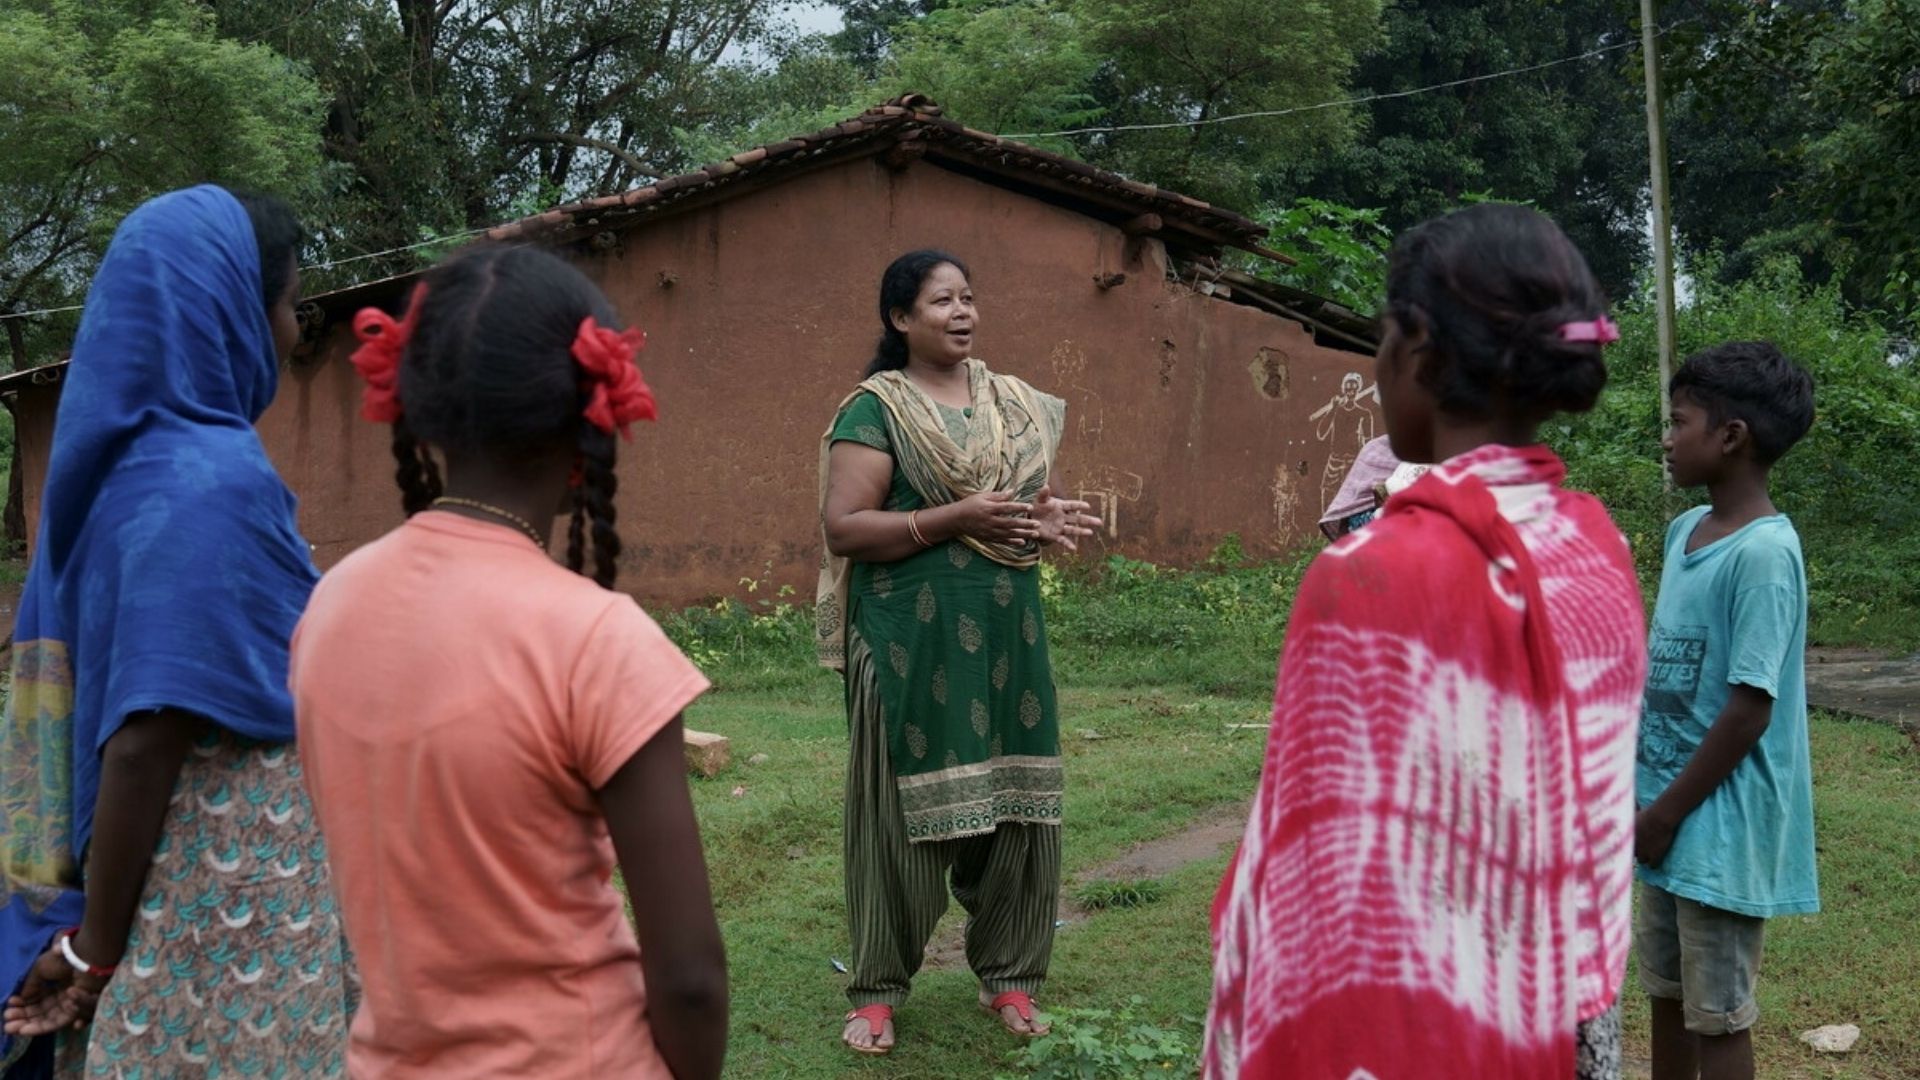 A team member speaking to local women